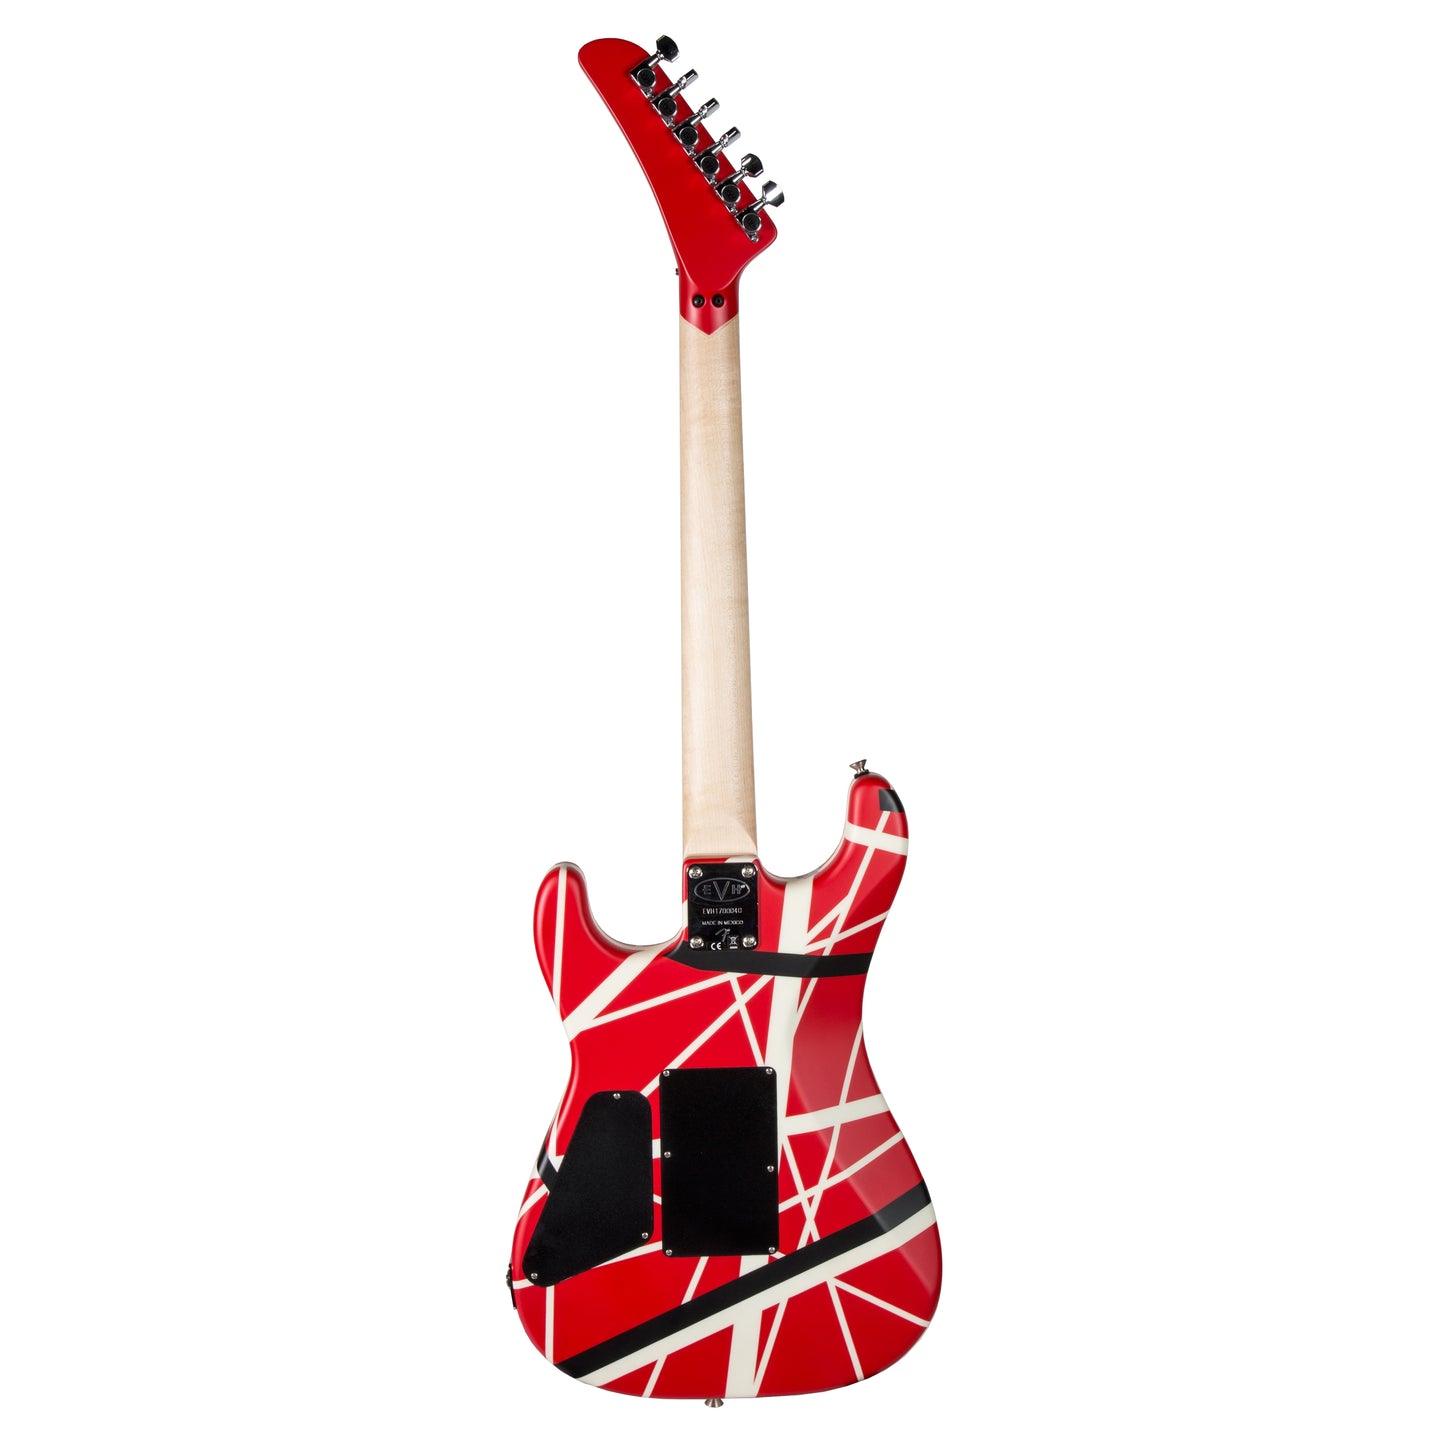 EVH Striped Series 5150® Electric Guitar - Red, Black and White Stripes